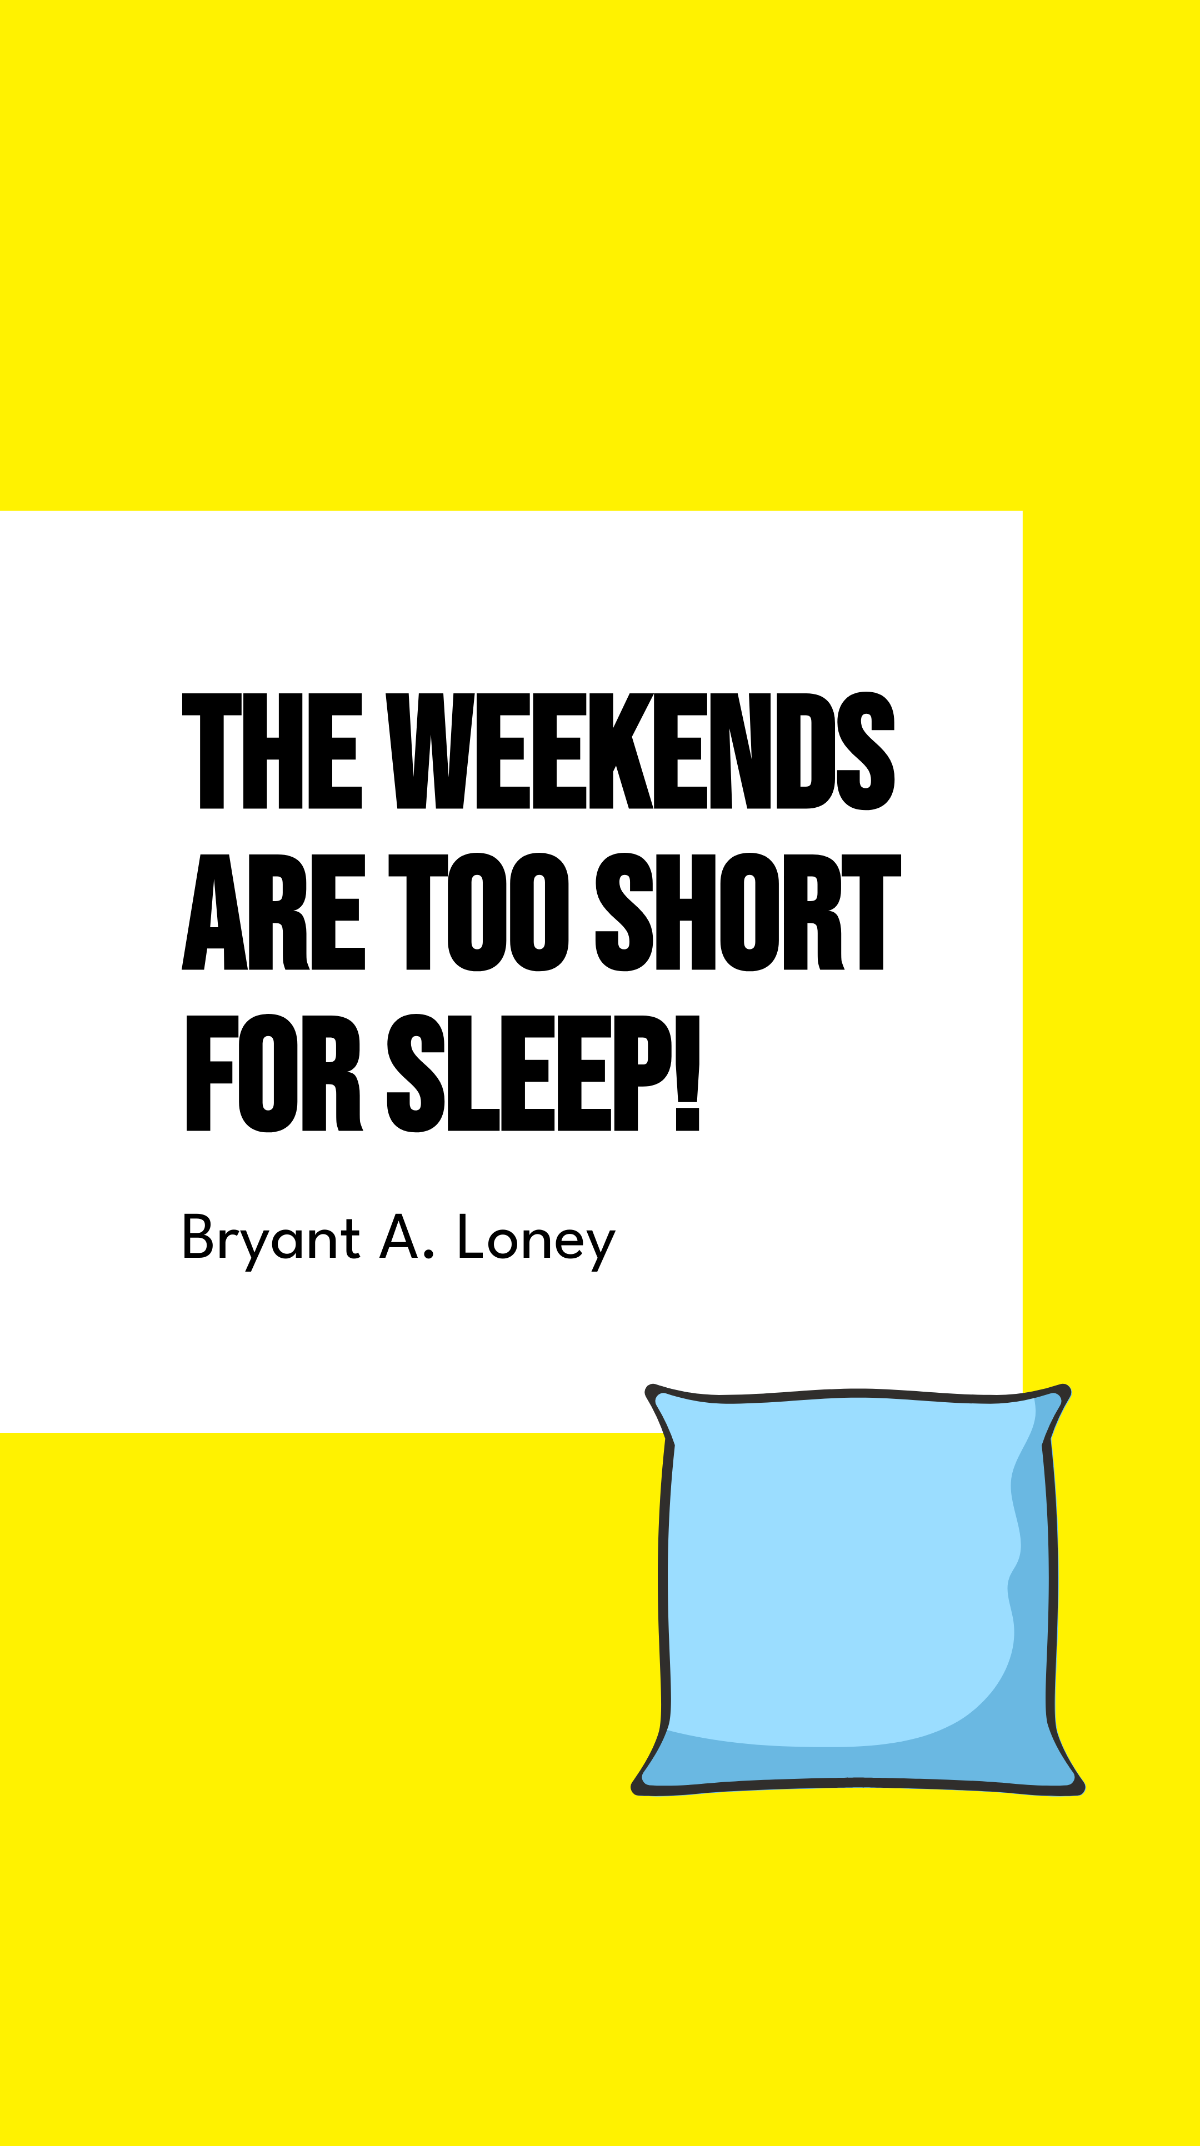 Bryant A. Loney - The weekends are too short for sleep!  Template